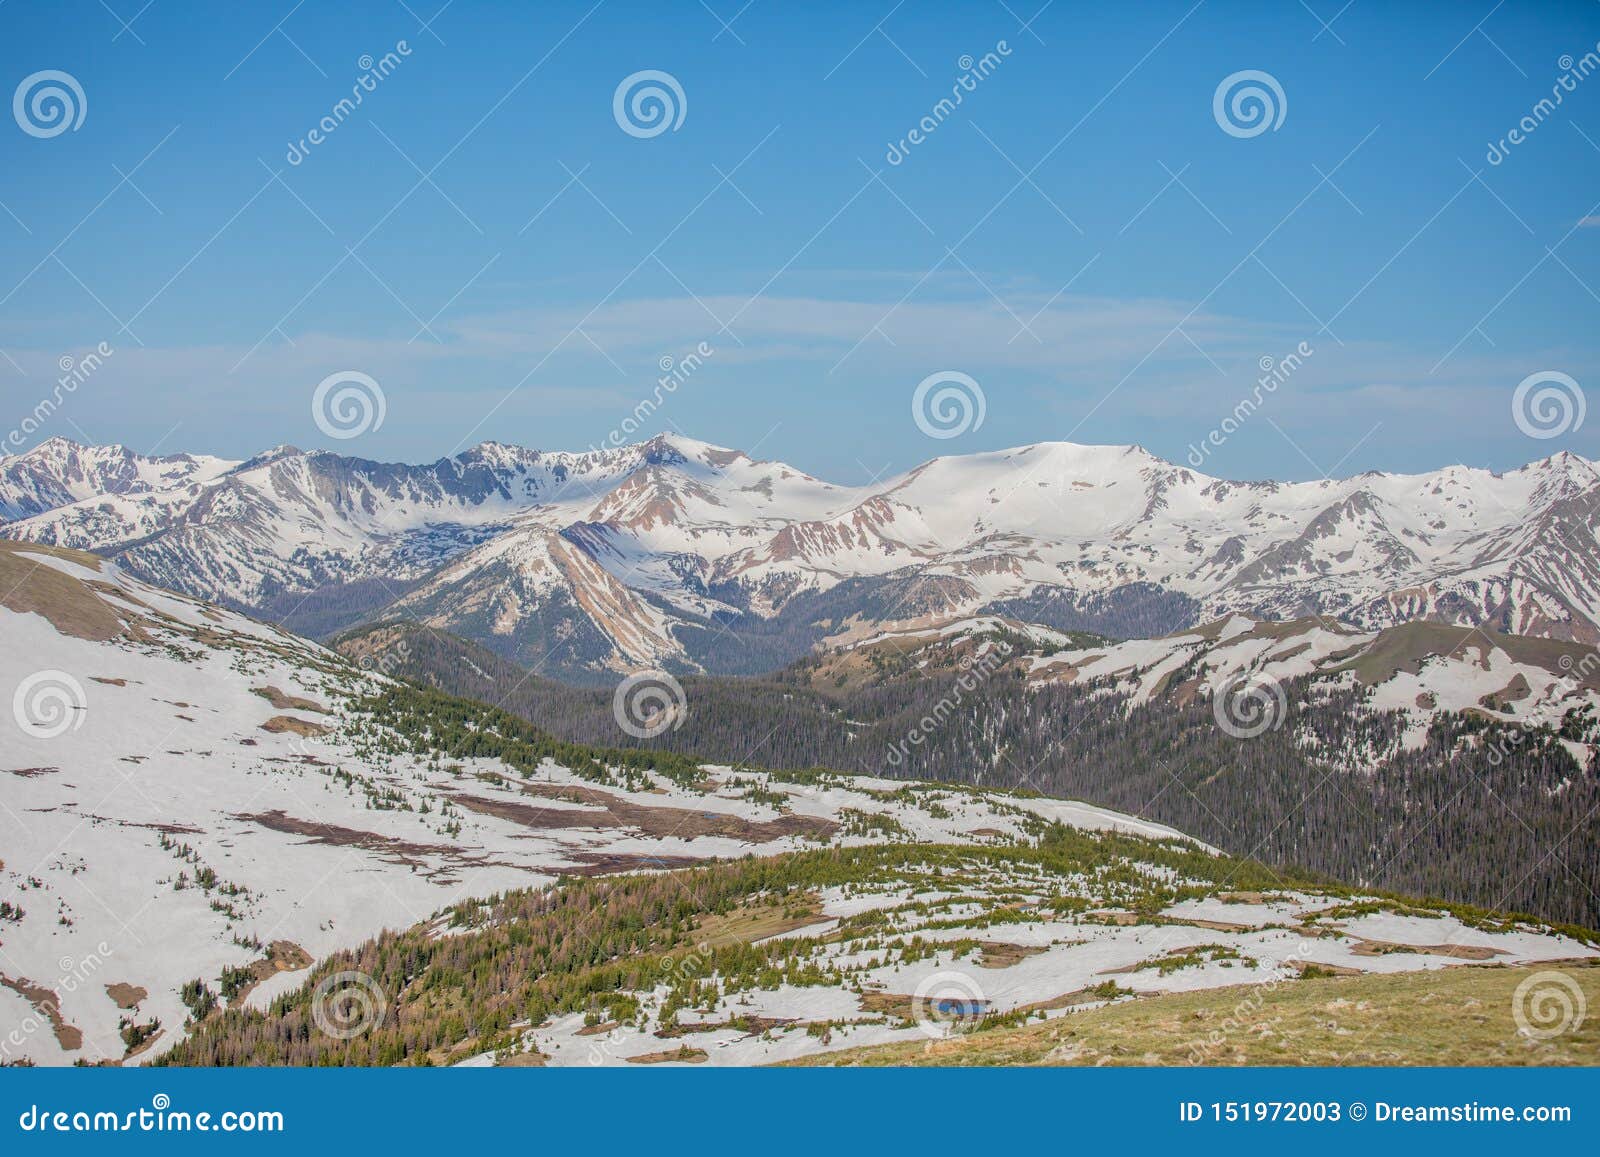 Green Meadow And Snowy Mountains On A Summer Day In Rocky Mountain